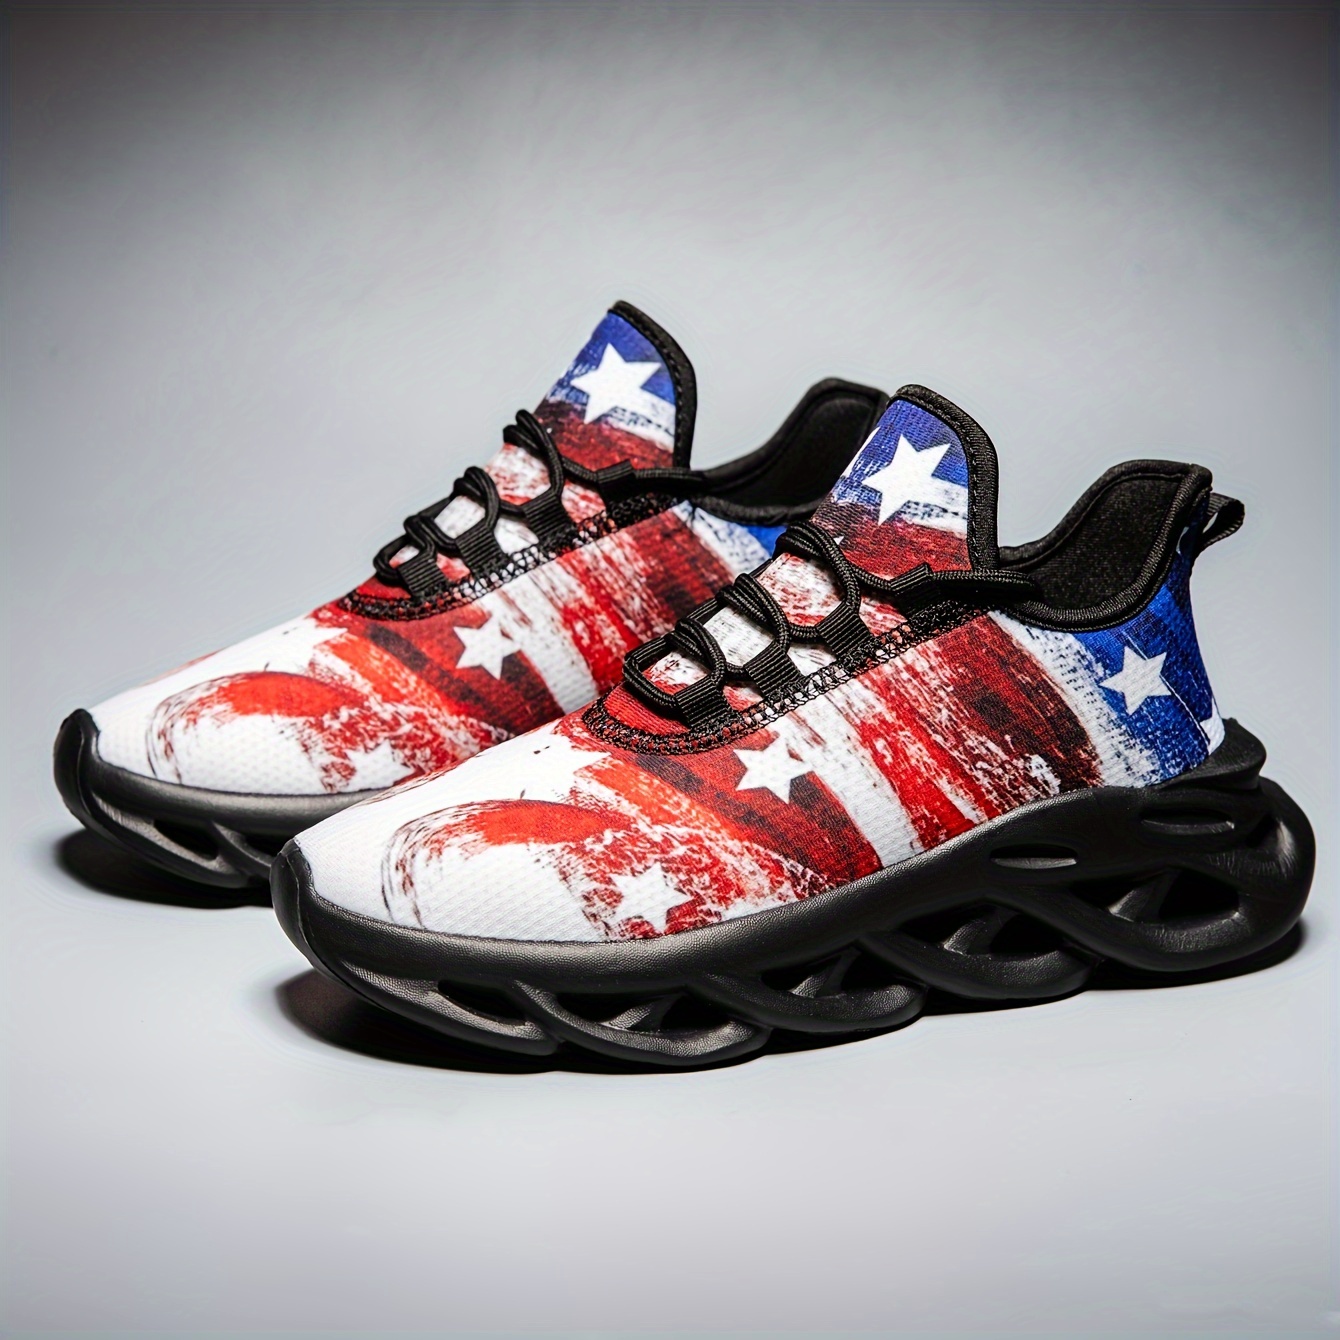 

Men's Independence Day Theme Print Low Top Sneakers, Lightweight Shock-absorbing Running Shoes For All Seasons